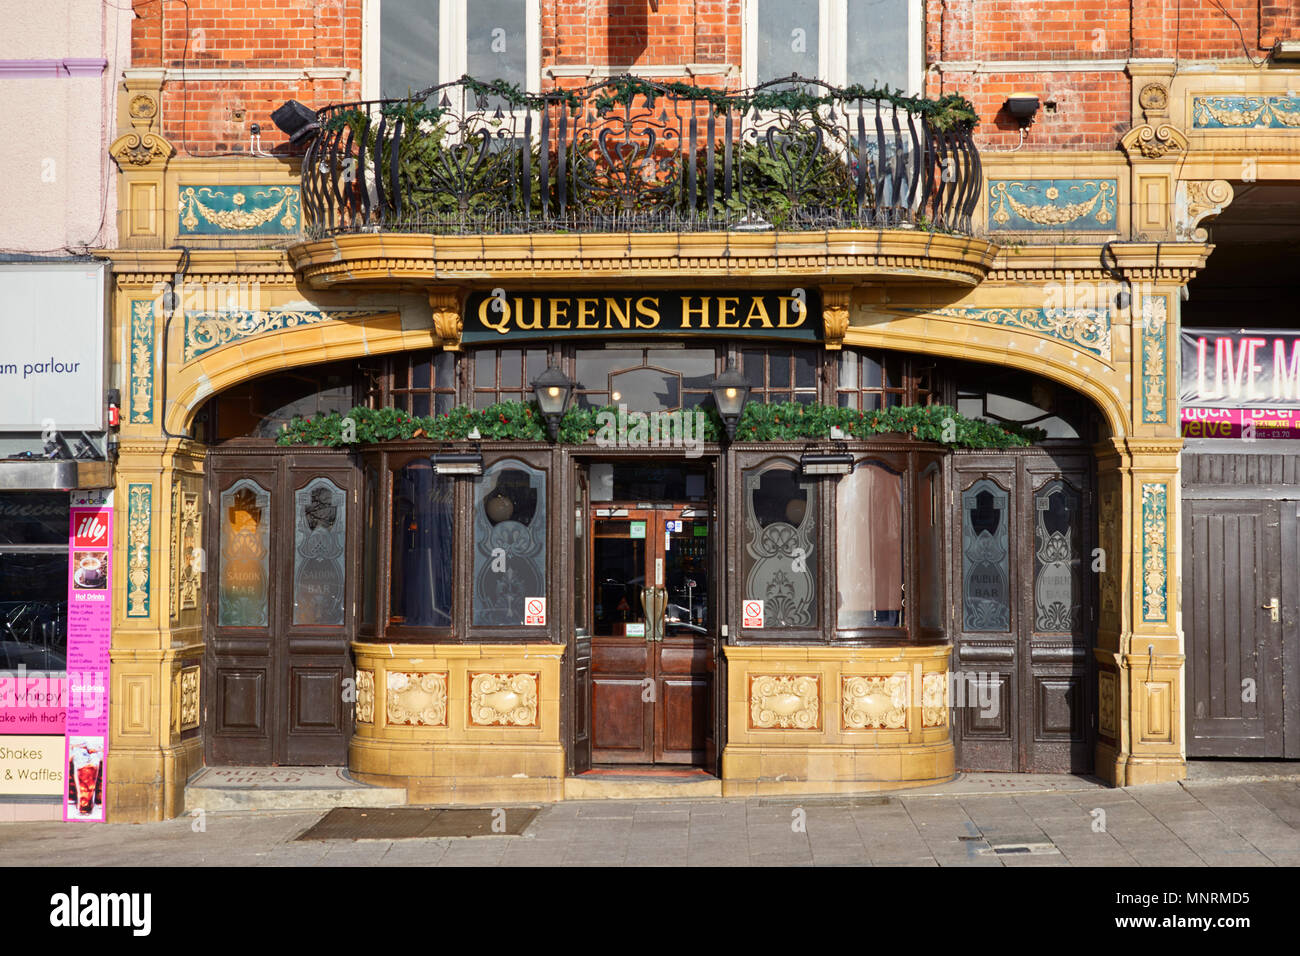 Tiled and decorative front of the Queens Head public house in Ramsgate, Kent Stock Photo